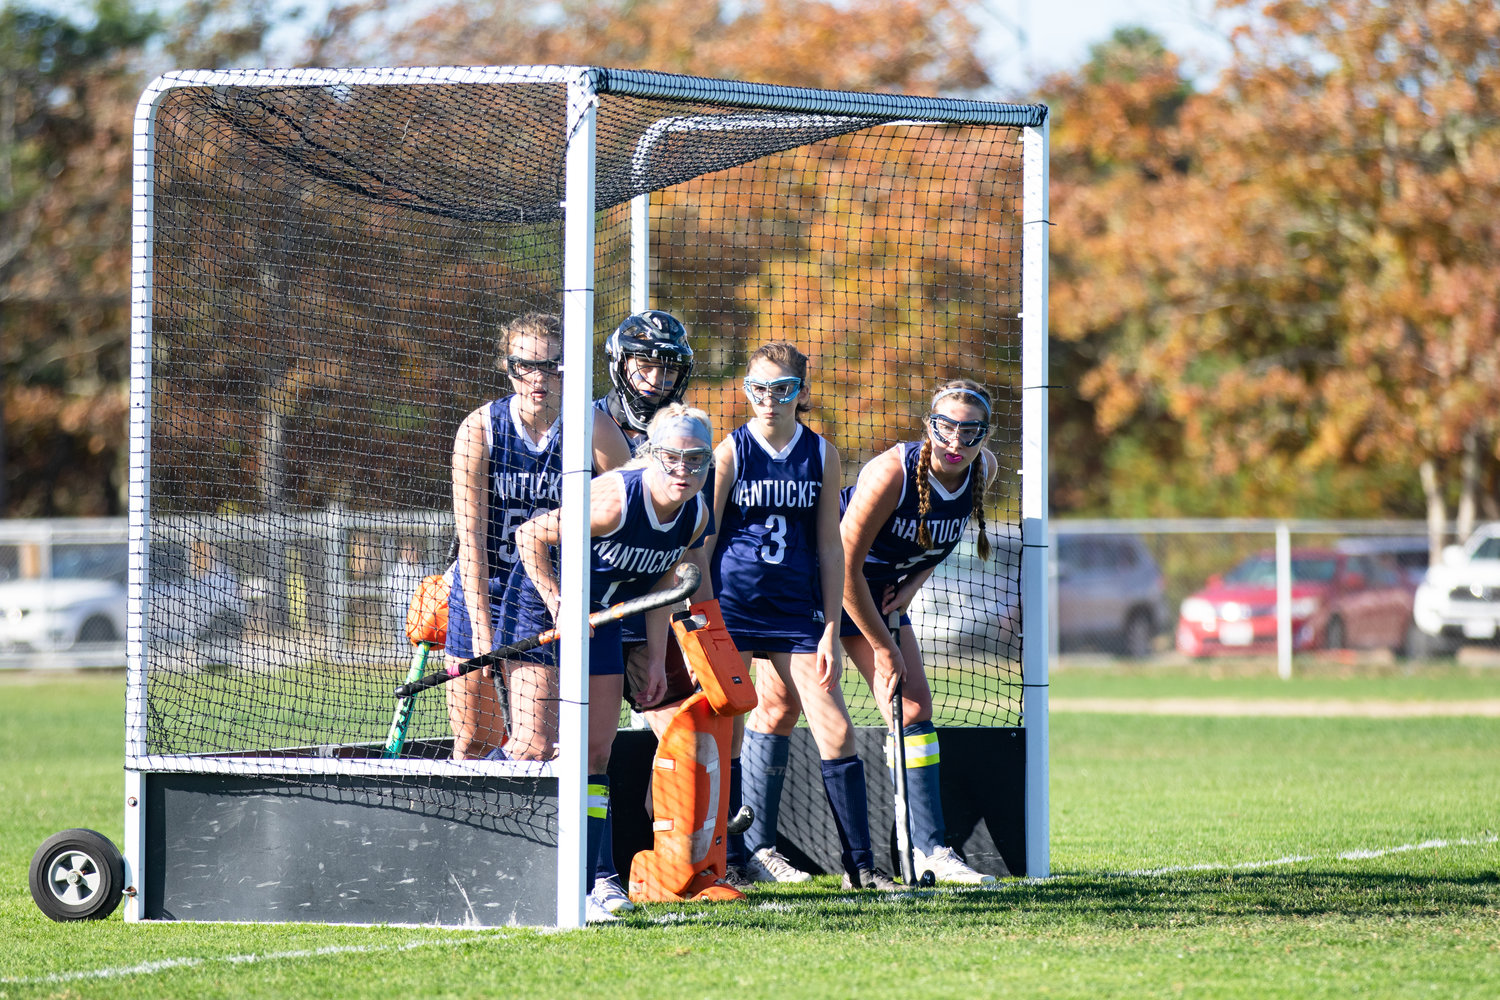 The Whalers prepare for a penalty corner in Saturday's game against Martha's Vineyard. Nantucket will travel to Franklin County Tech later this week to open the Div. 4 state tournament.